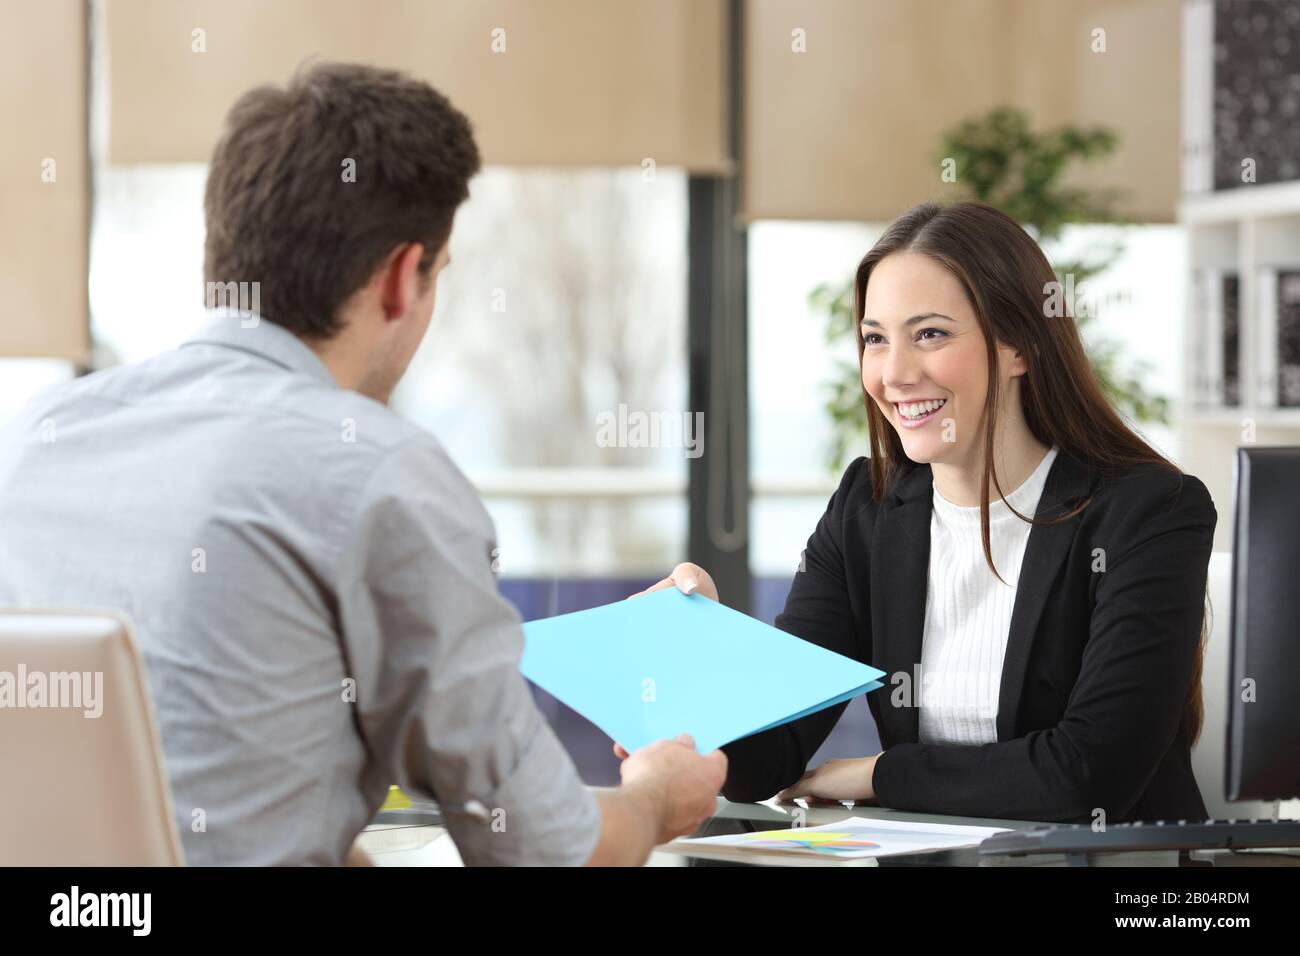 Employee giving folder to his happy manager during interview at office Stock Photo